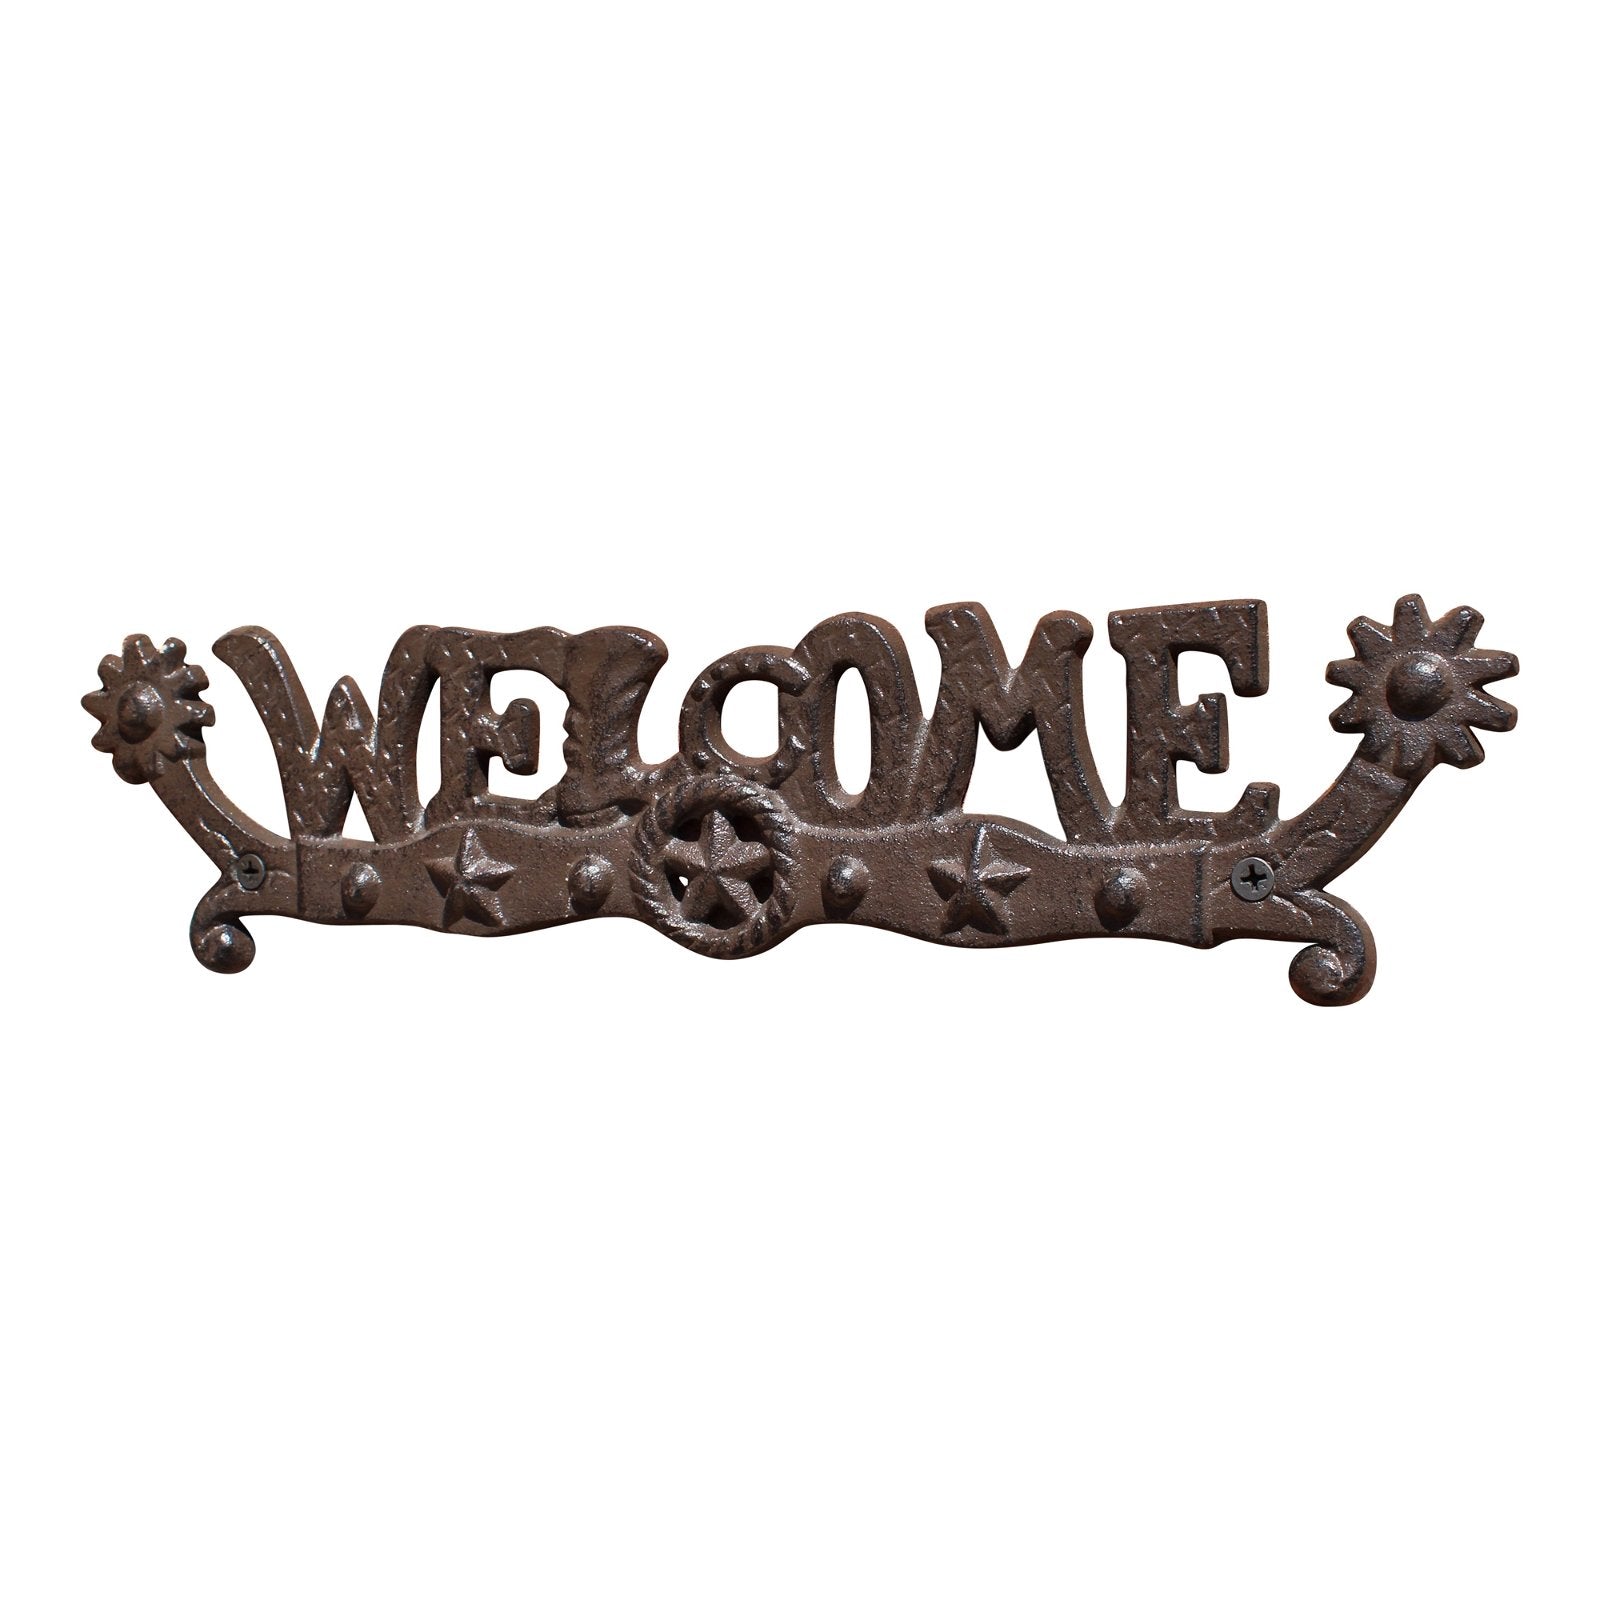 View Rustic Cast Iron Decorative Welcome Sign information